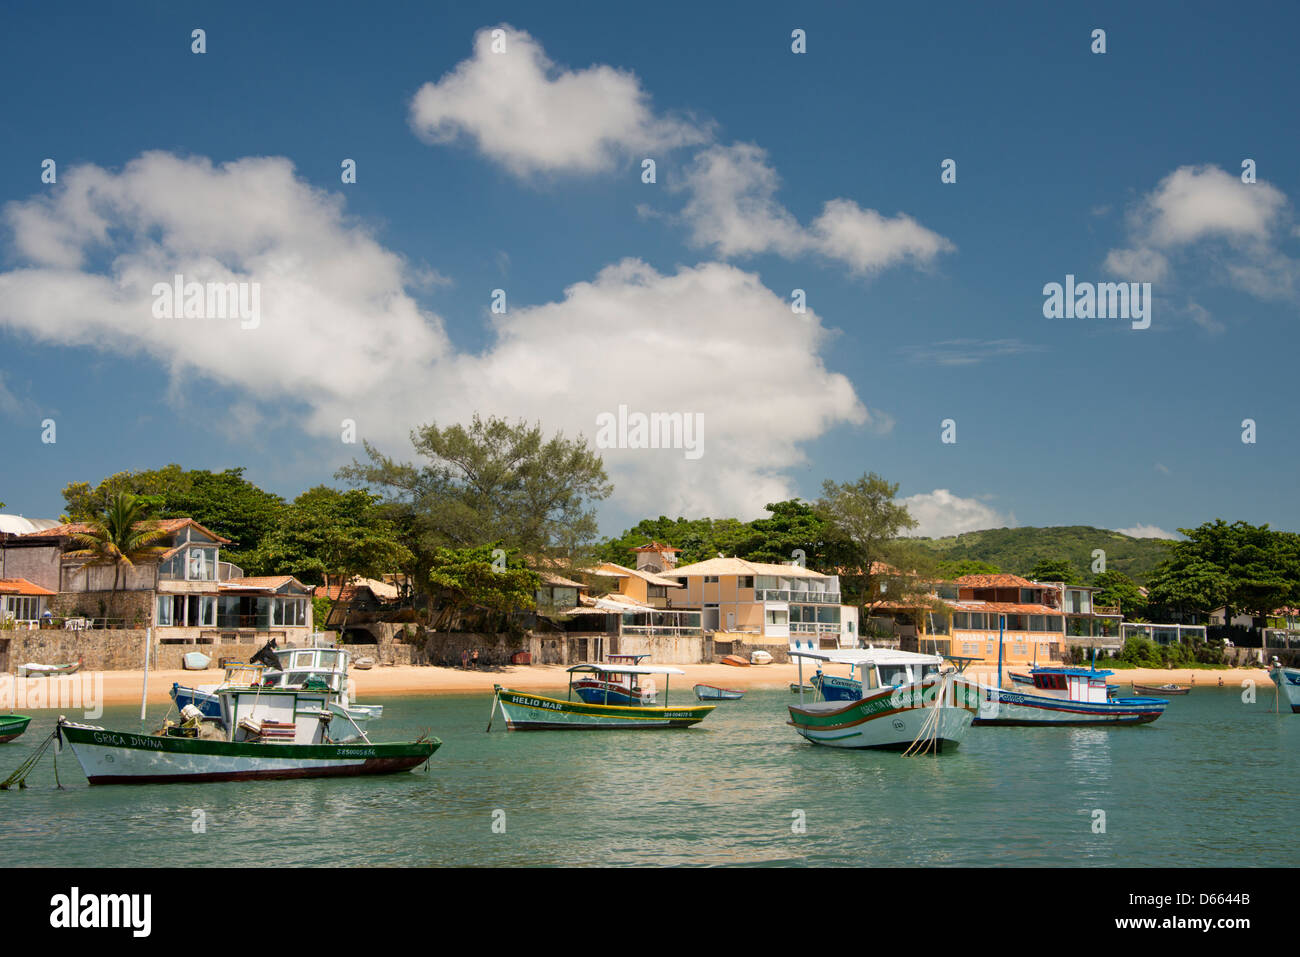 Brazil, state of Rio de Janeiro, Buzios. Waterfront and port area of Buzios with colorful fishing boats. Stock Photo